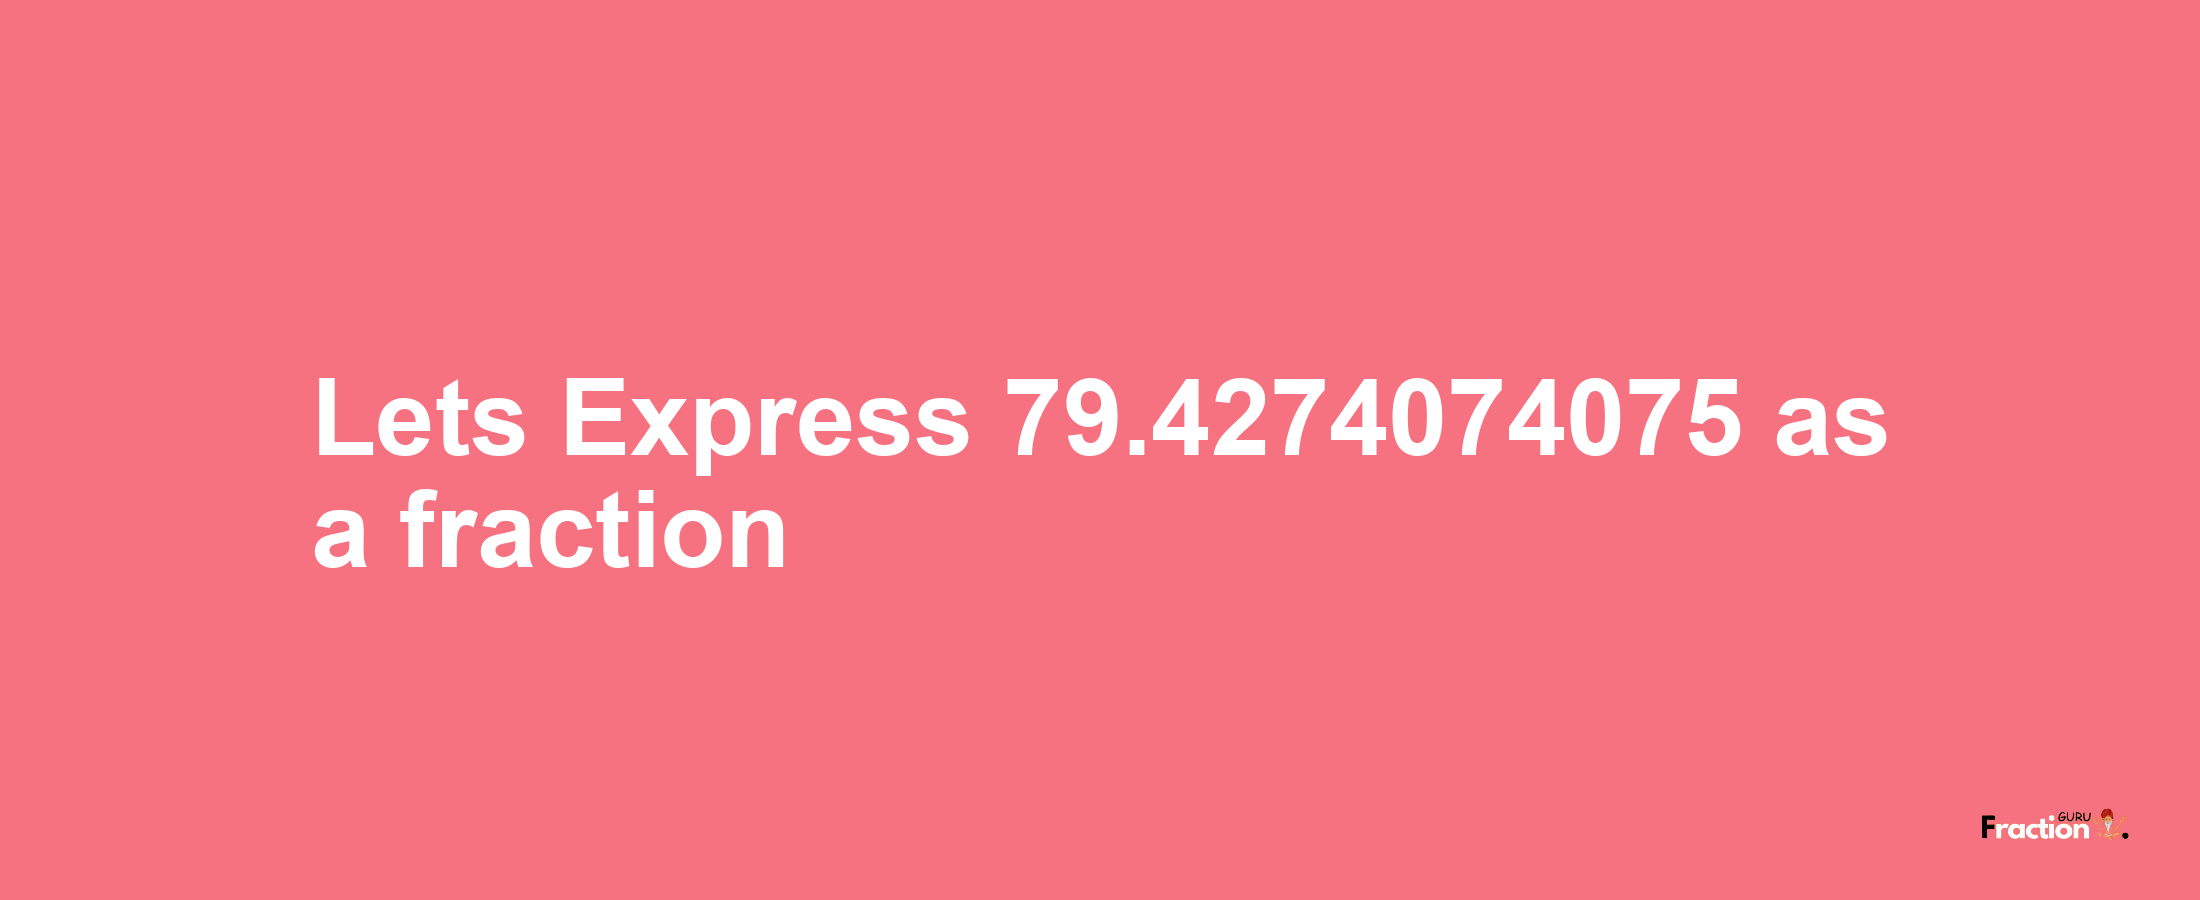 Lets Express 79.4274074075 as afraction